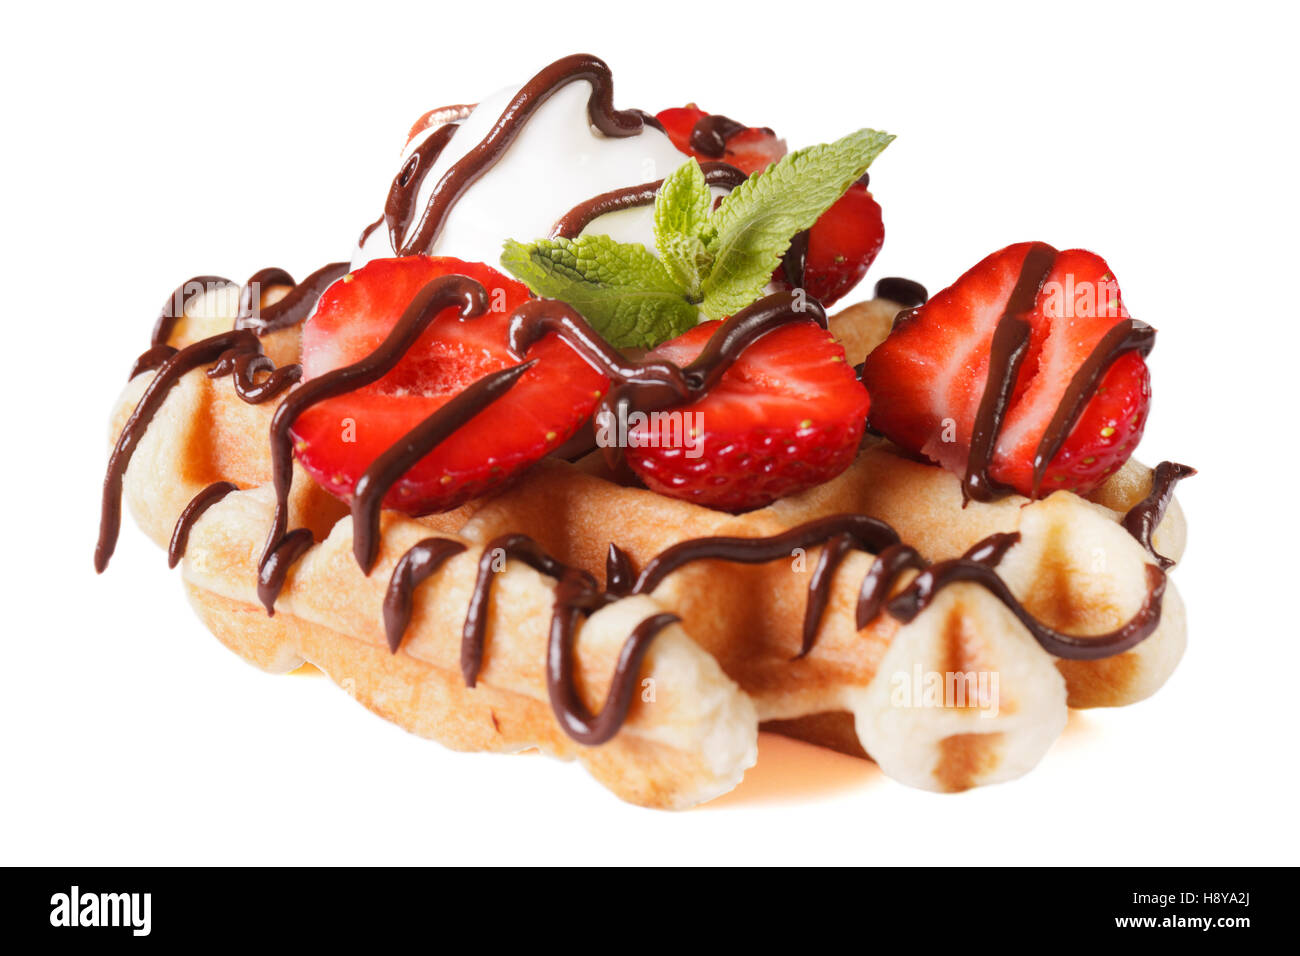 Belgian waffles with strawberries and chocolate topping close up isolated on white background Stock Photo